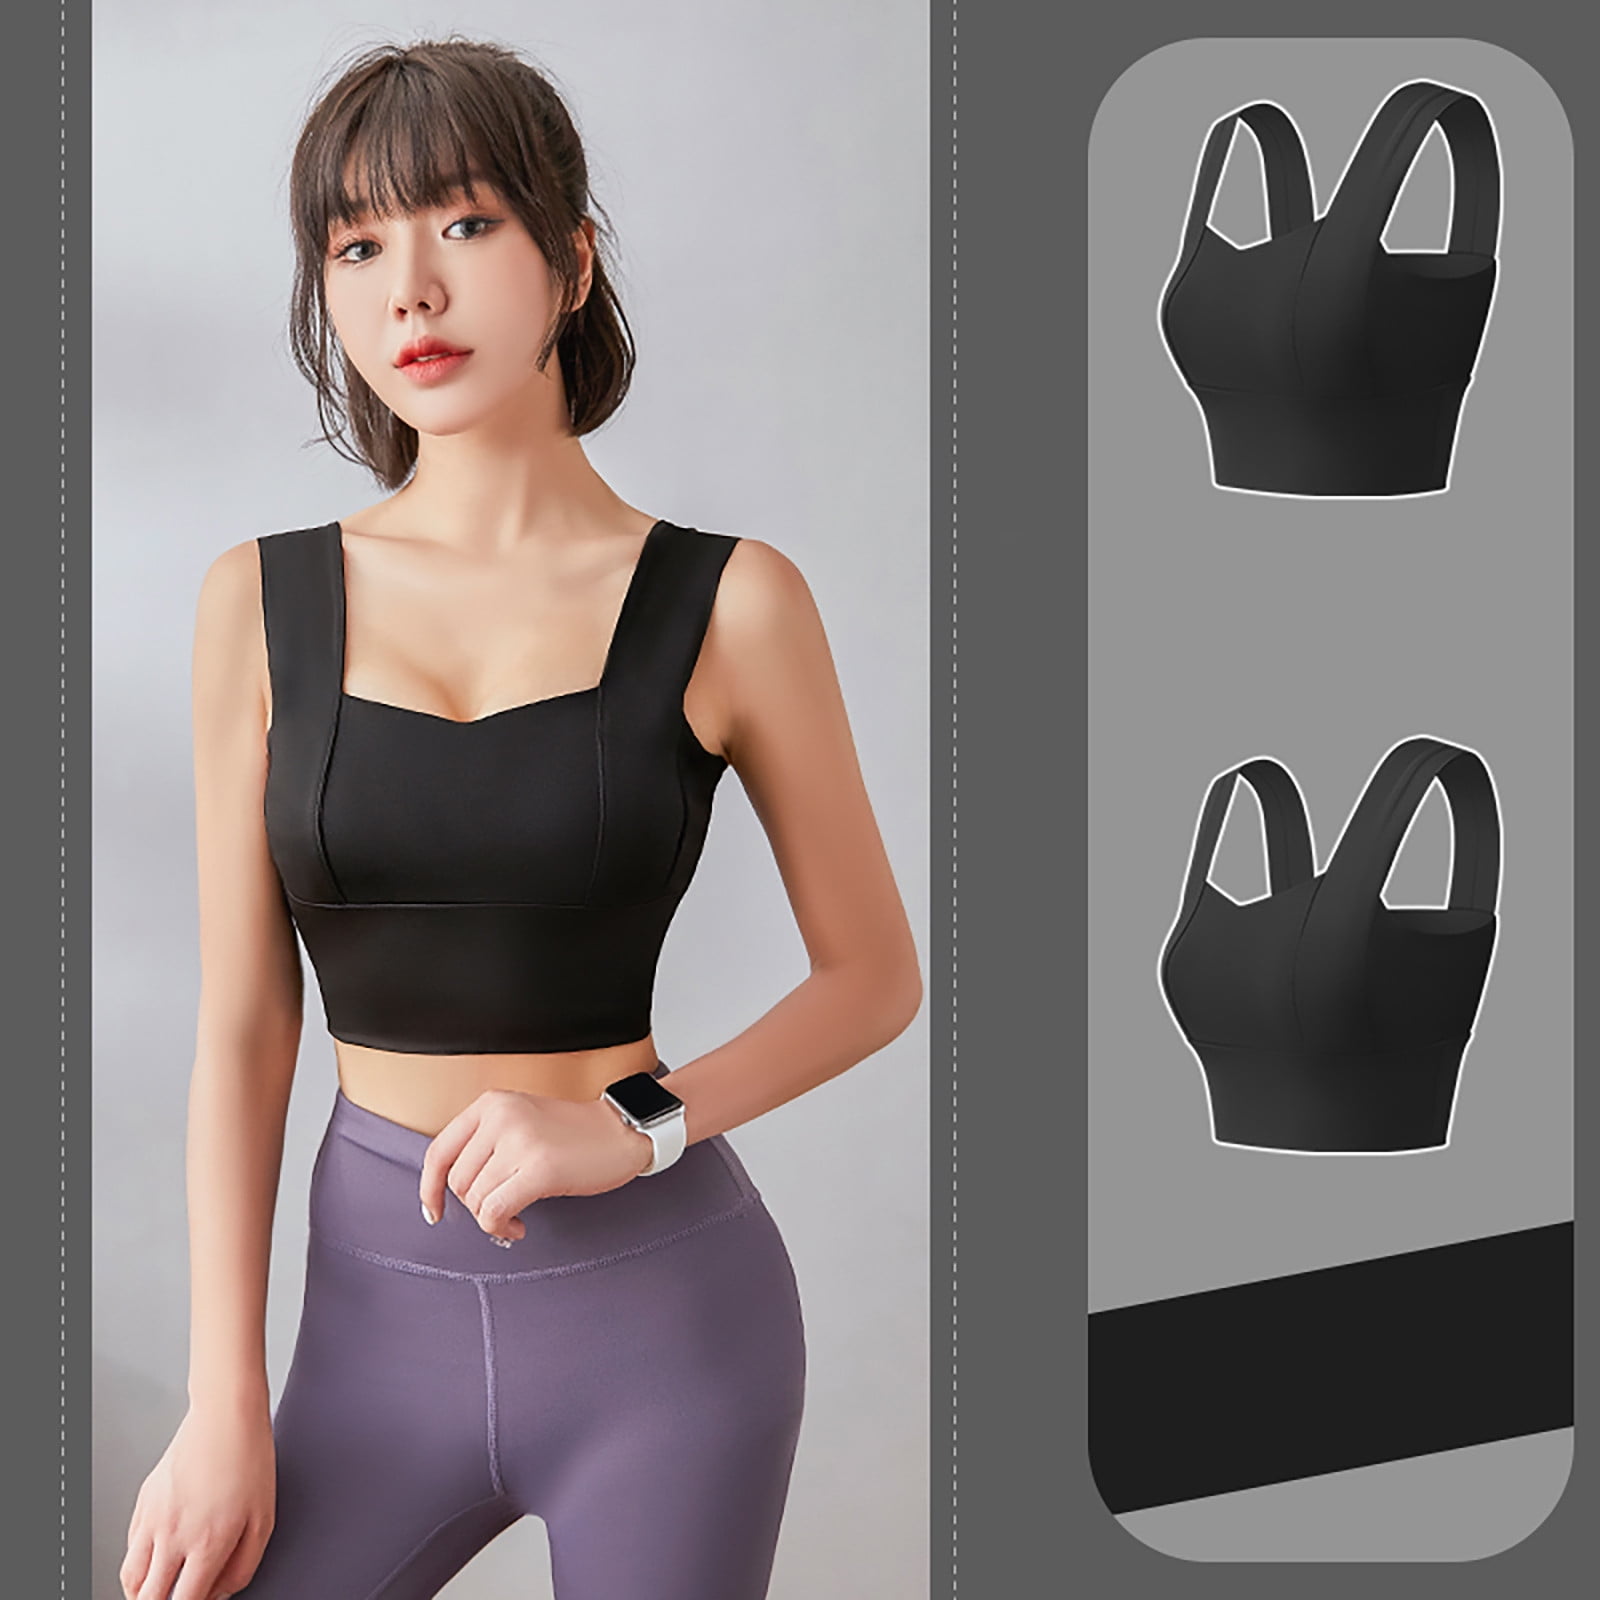 purcolt Fall Saving Clearance!Plus Size Sports Bras for Women,High Impact  Support Sports Bras Wireless Push Up Paded Yoga Bras Workout Tops Comfort Full  Coverage Everyday Sleeping Seamless Bralettes 